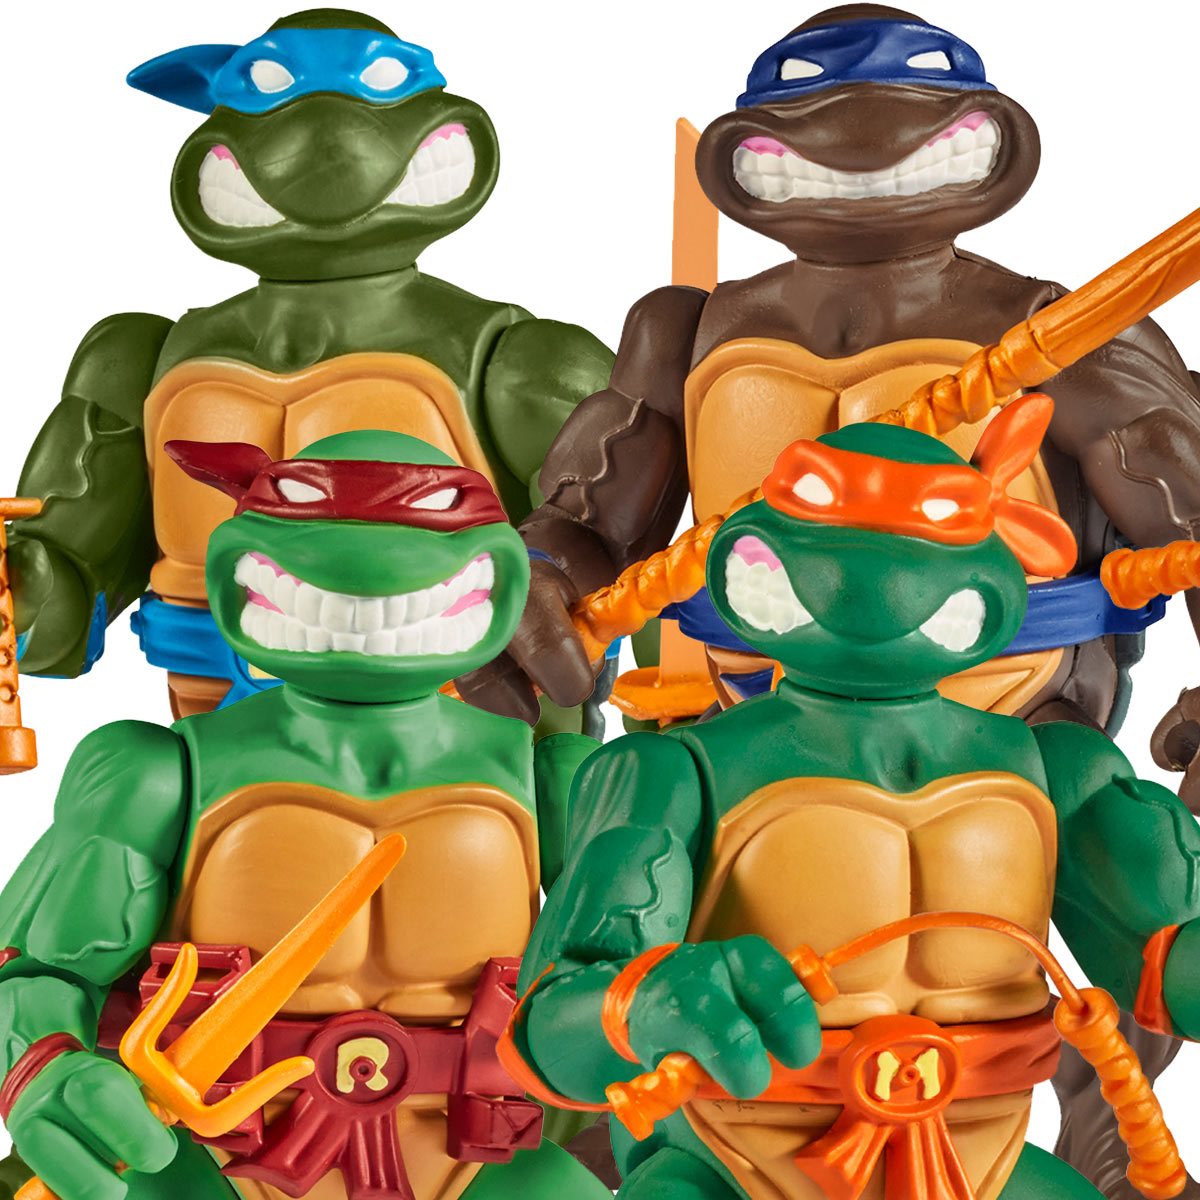 TMNT Original Series Leonardo with Storage Shell Action Figure – Complete –  The Toys Time Forgot